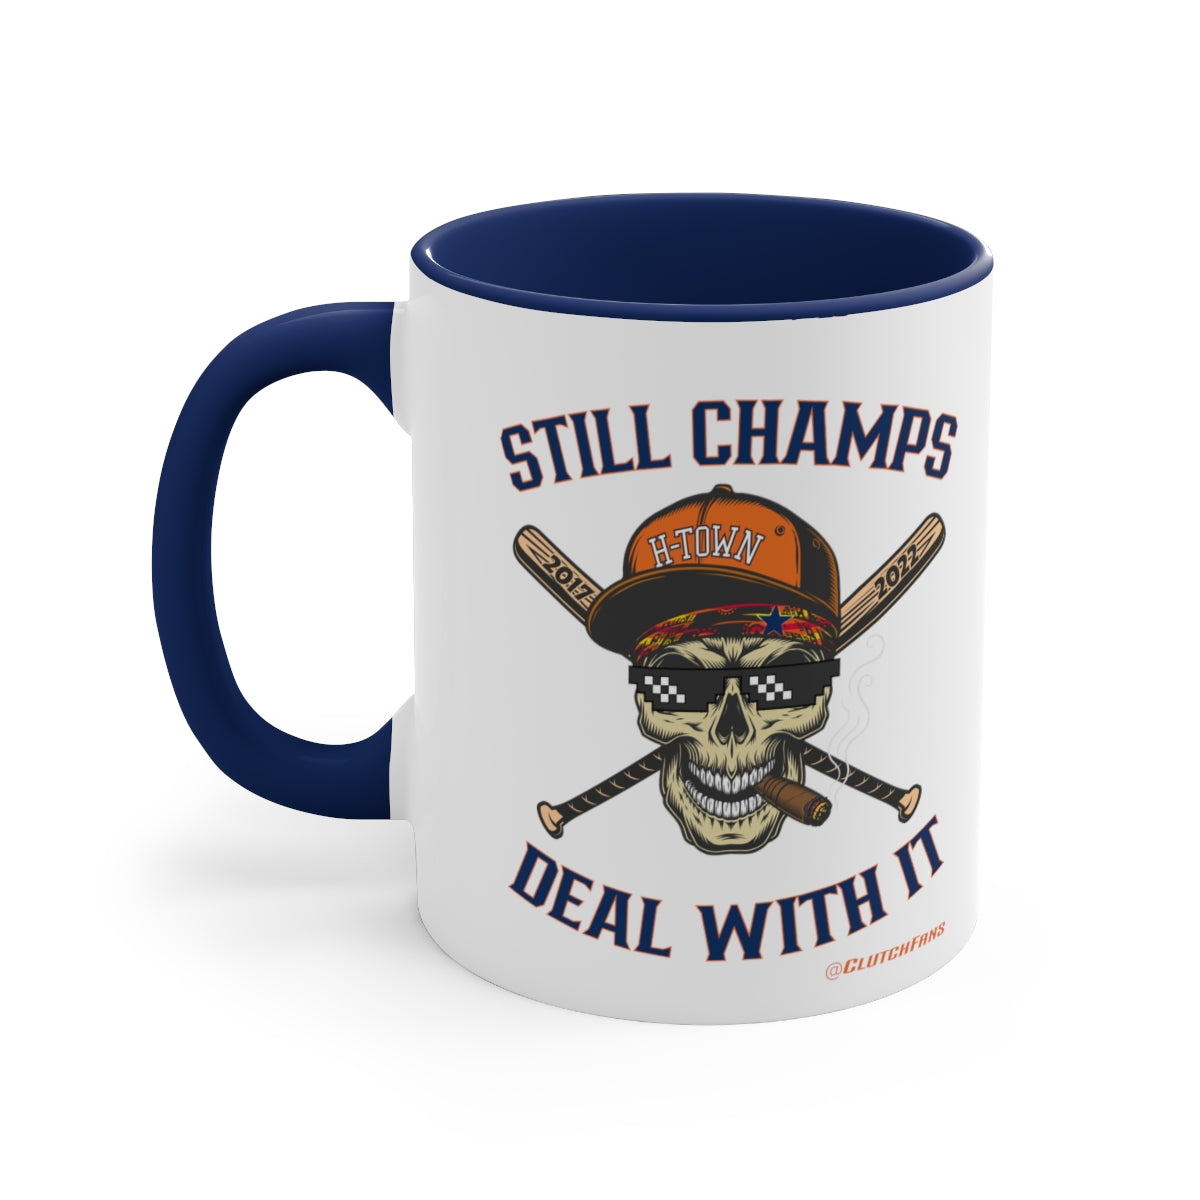 STILL CHAMPS: Deal With It! - Mug 11oz